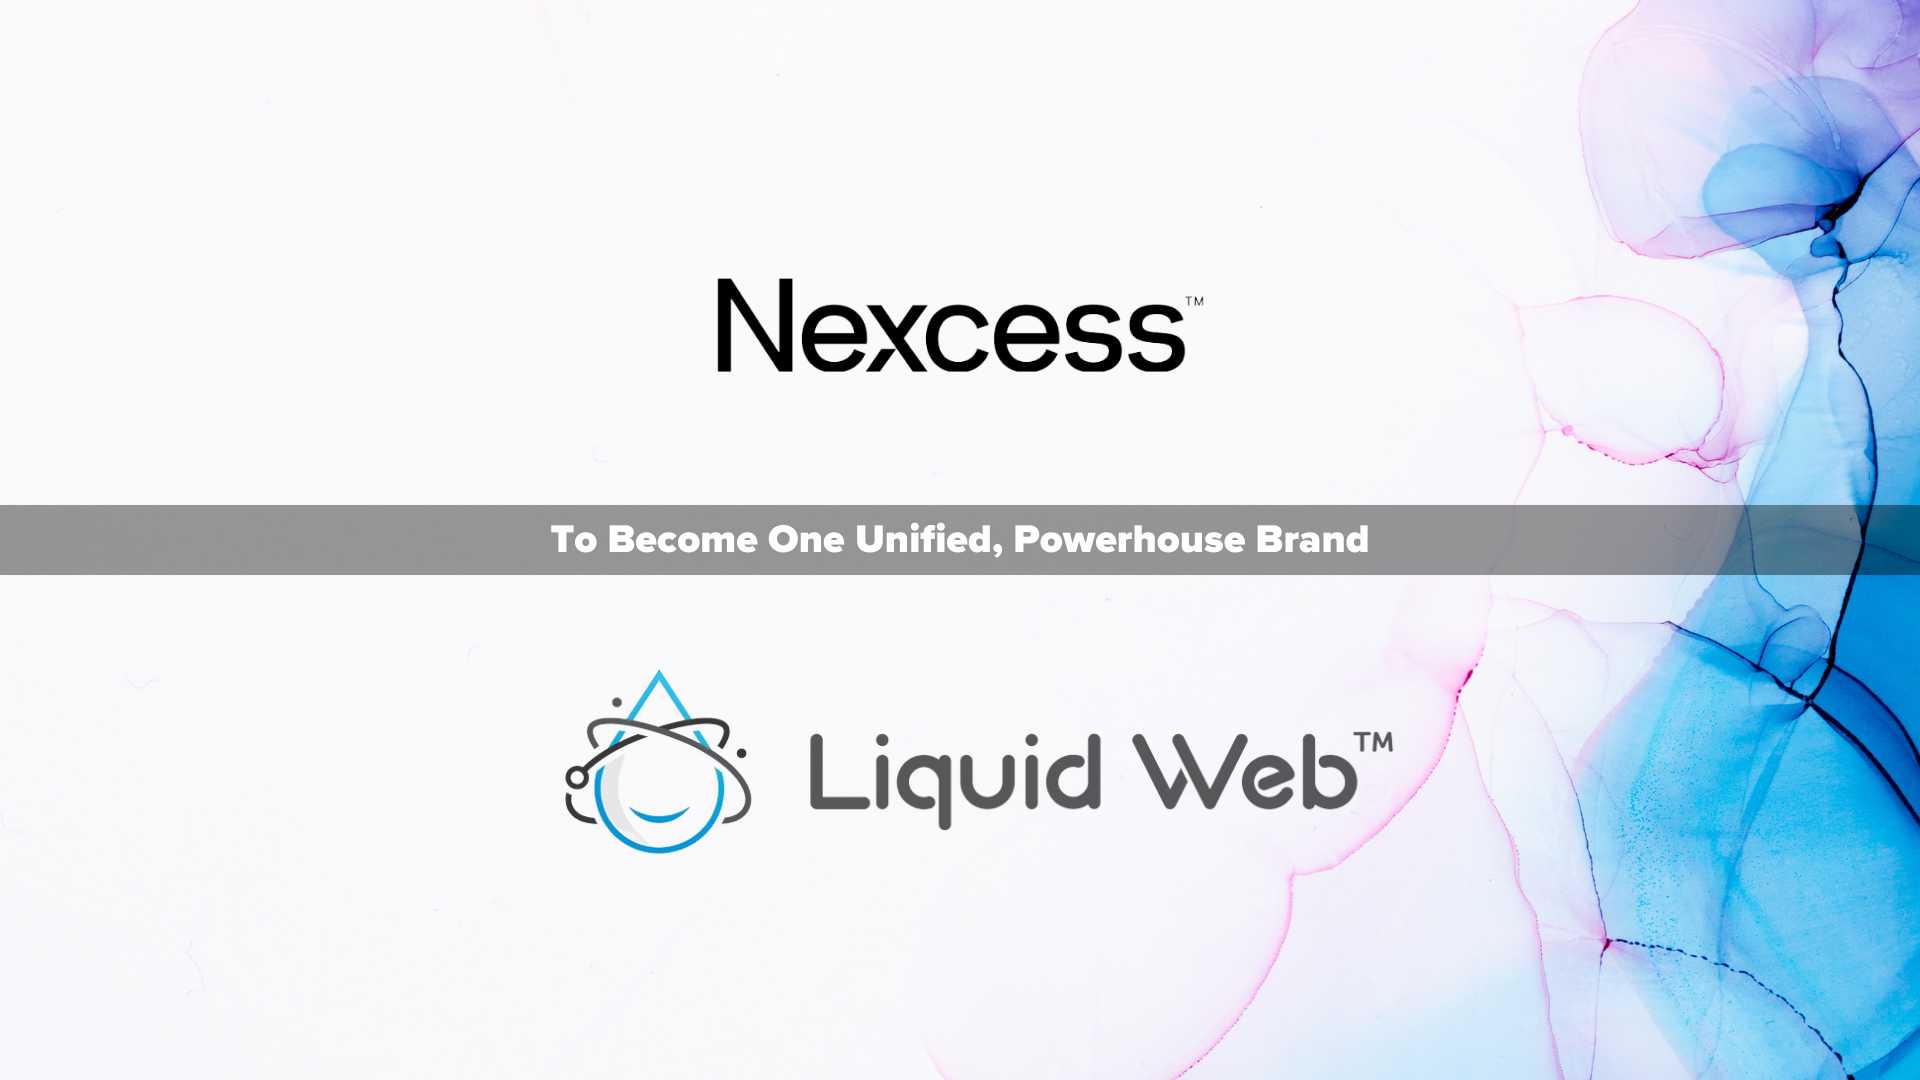 Revolutionizing Hosting: Nexcess and Liquid Web to Become One Unified, Powerhouse Brand